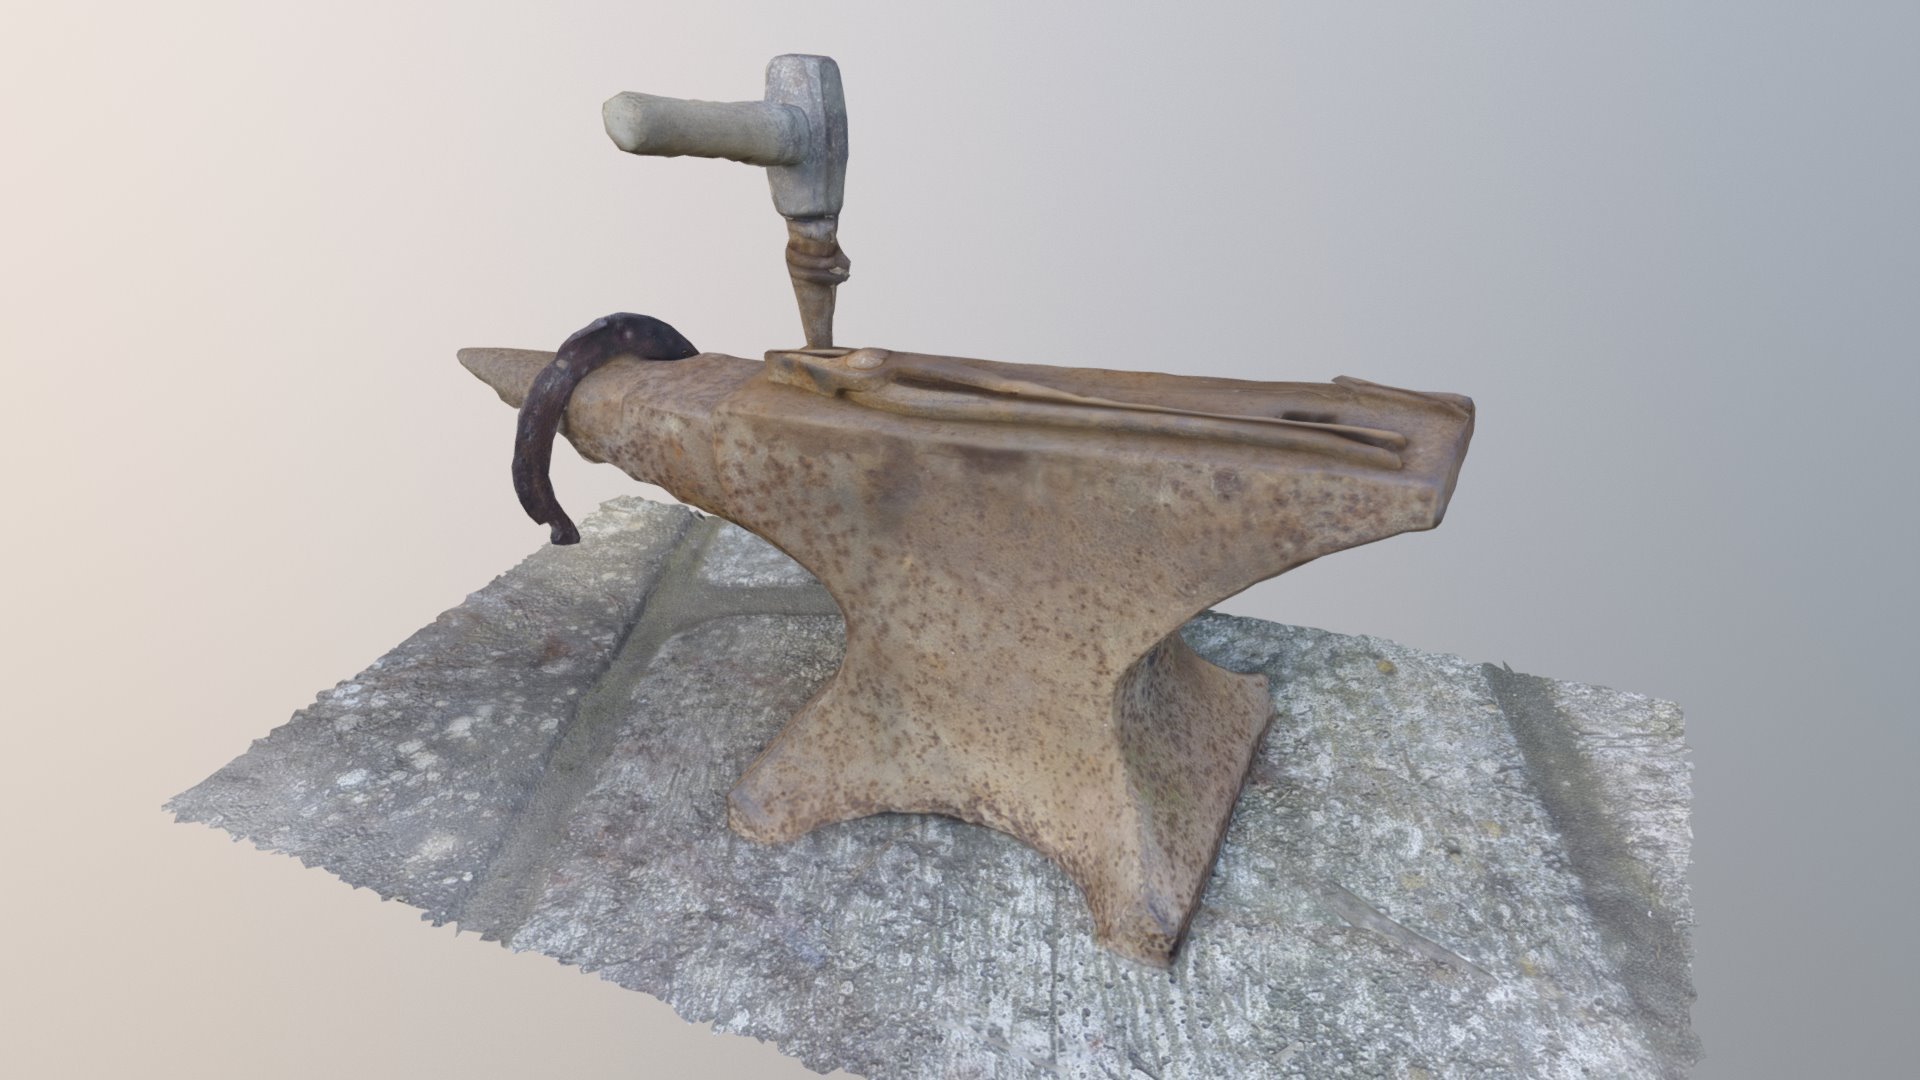 ANVIL download the new version